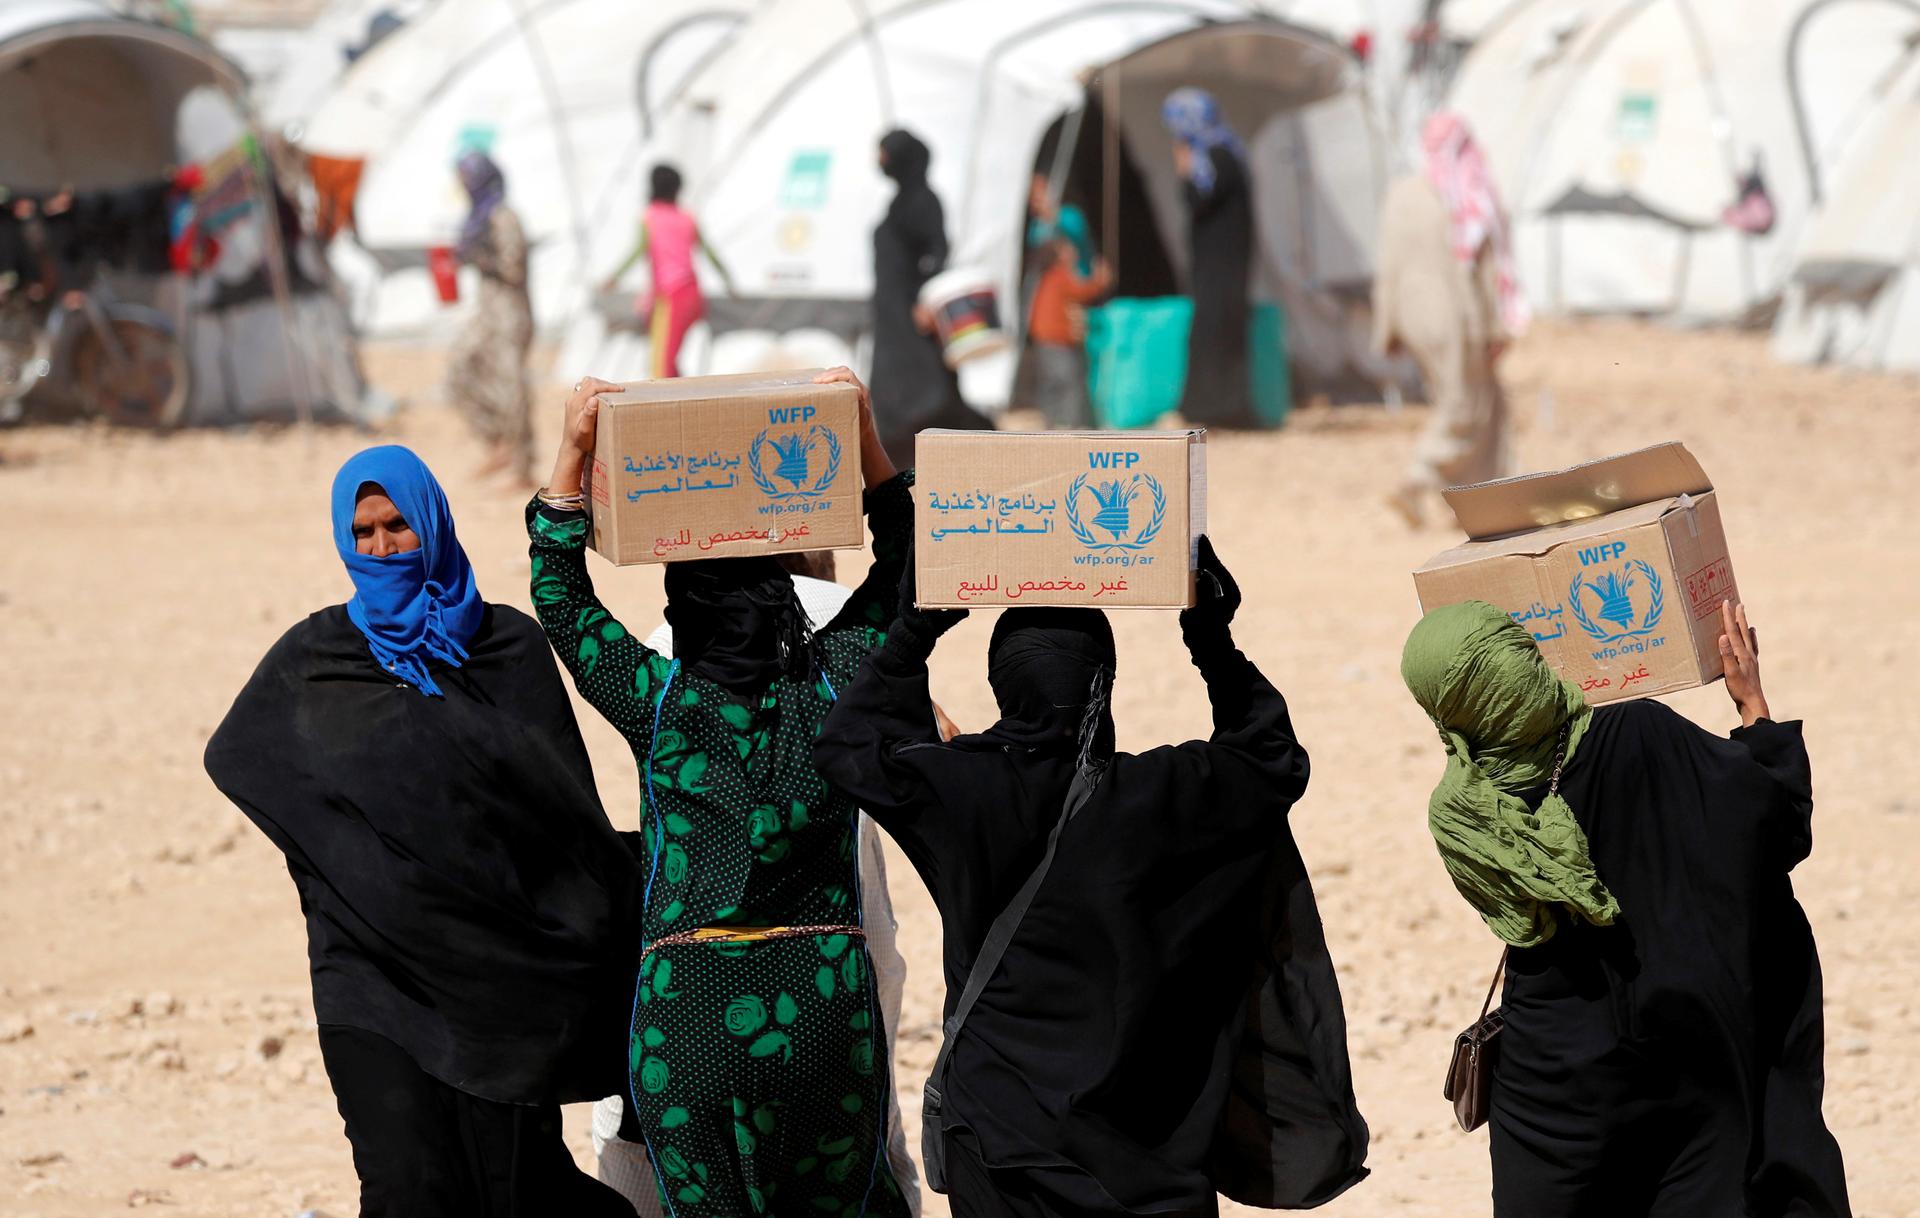 People displaced by the Syrian civil war carry boxes of food aid distributed by the UN's World Food Program at a refugee camp in Ain Issa, Syria, Oct. 10, 2017.